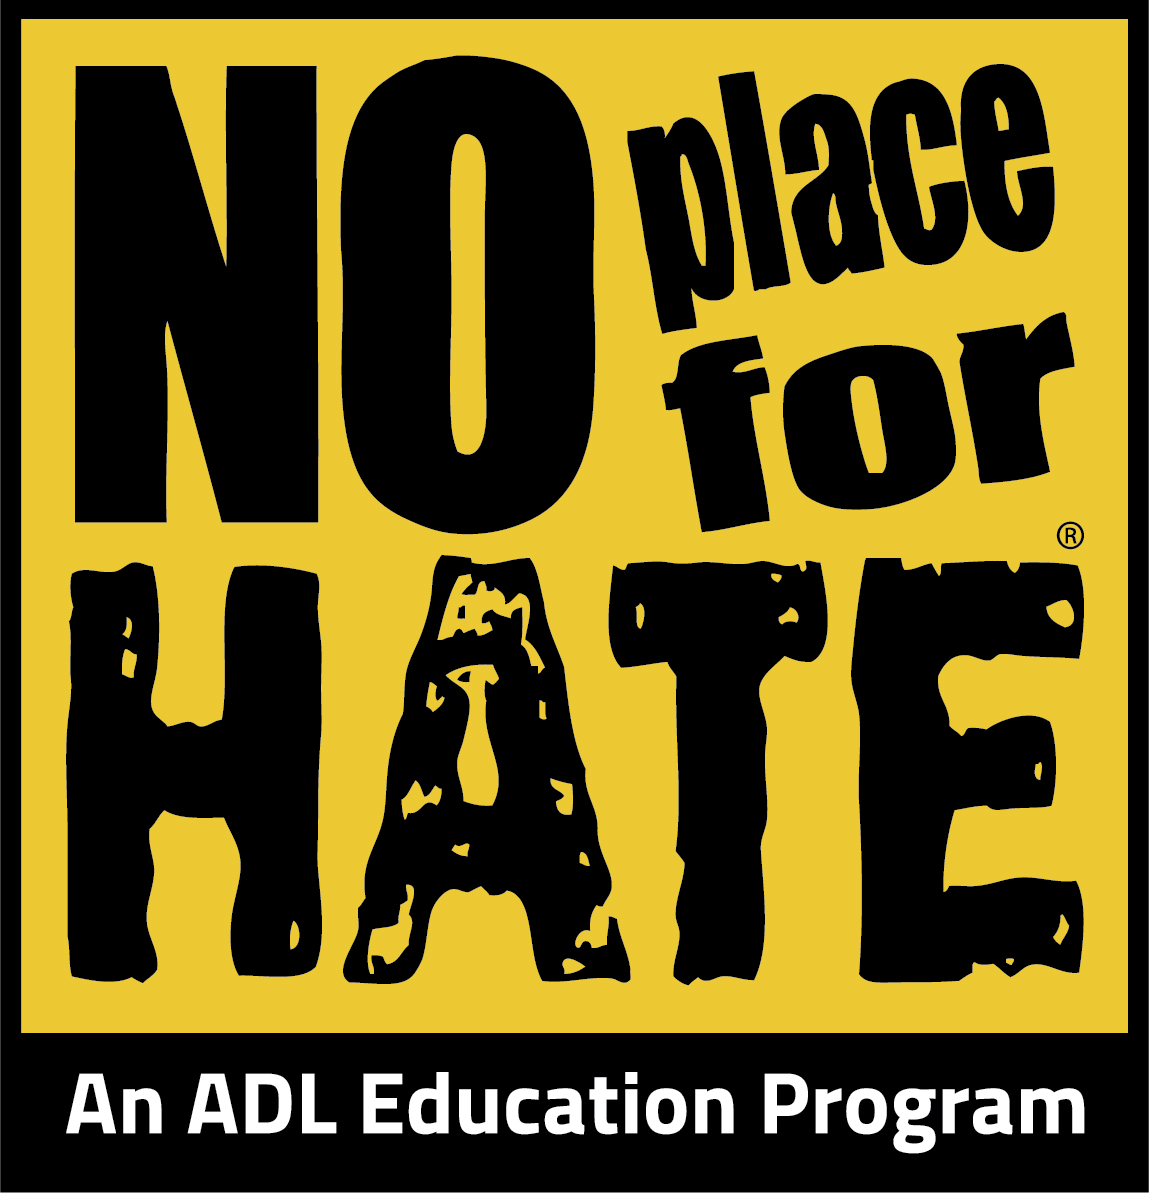 Blevins is a No Place For Hate school, a slogan and methodology hosted by the ADL Education Program